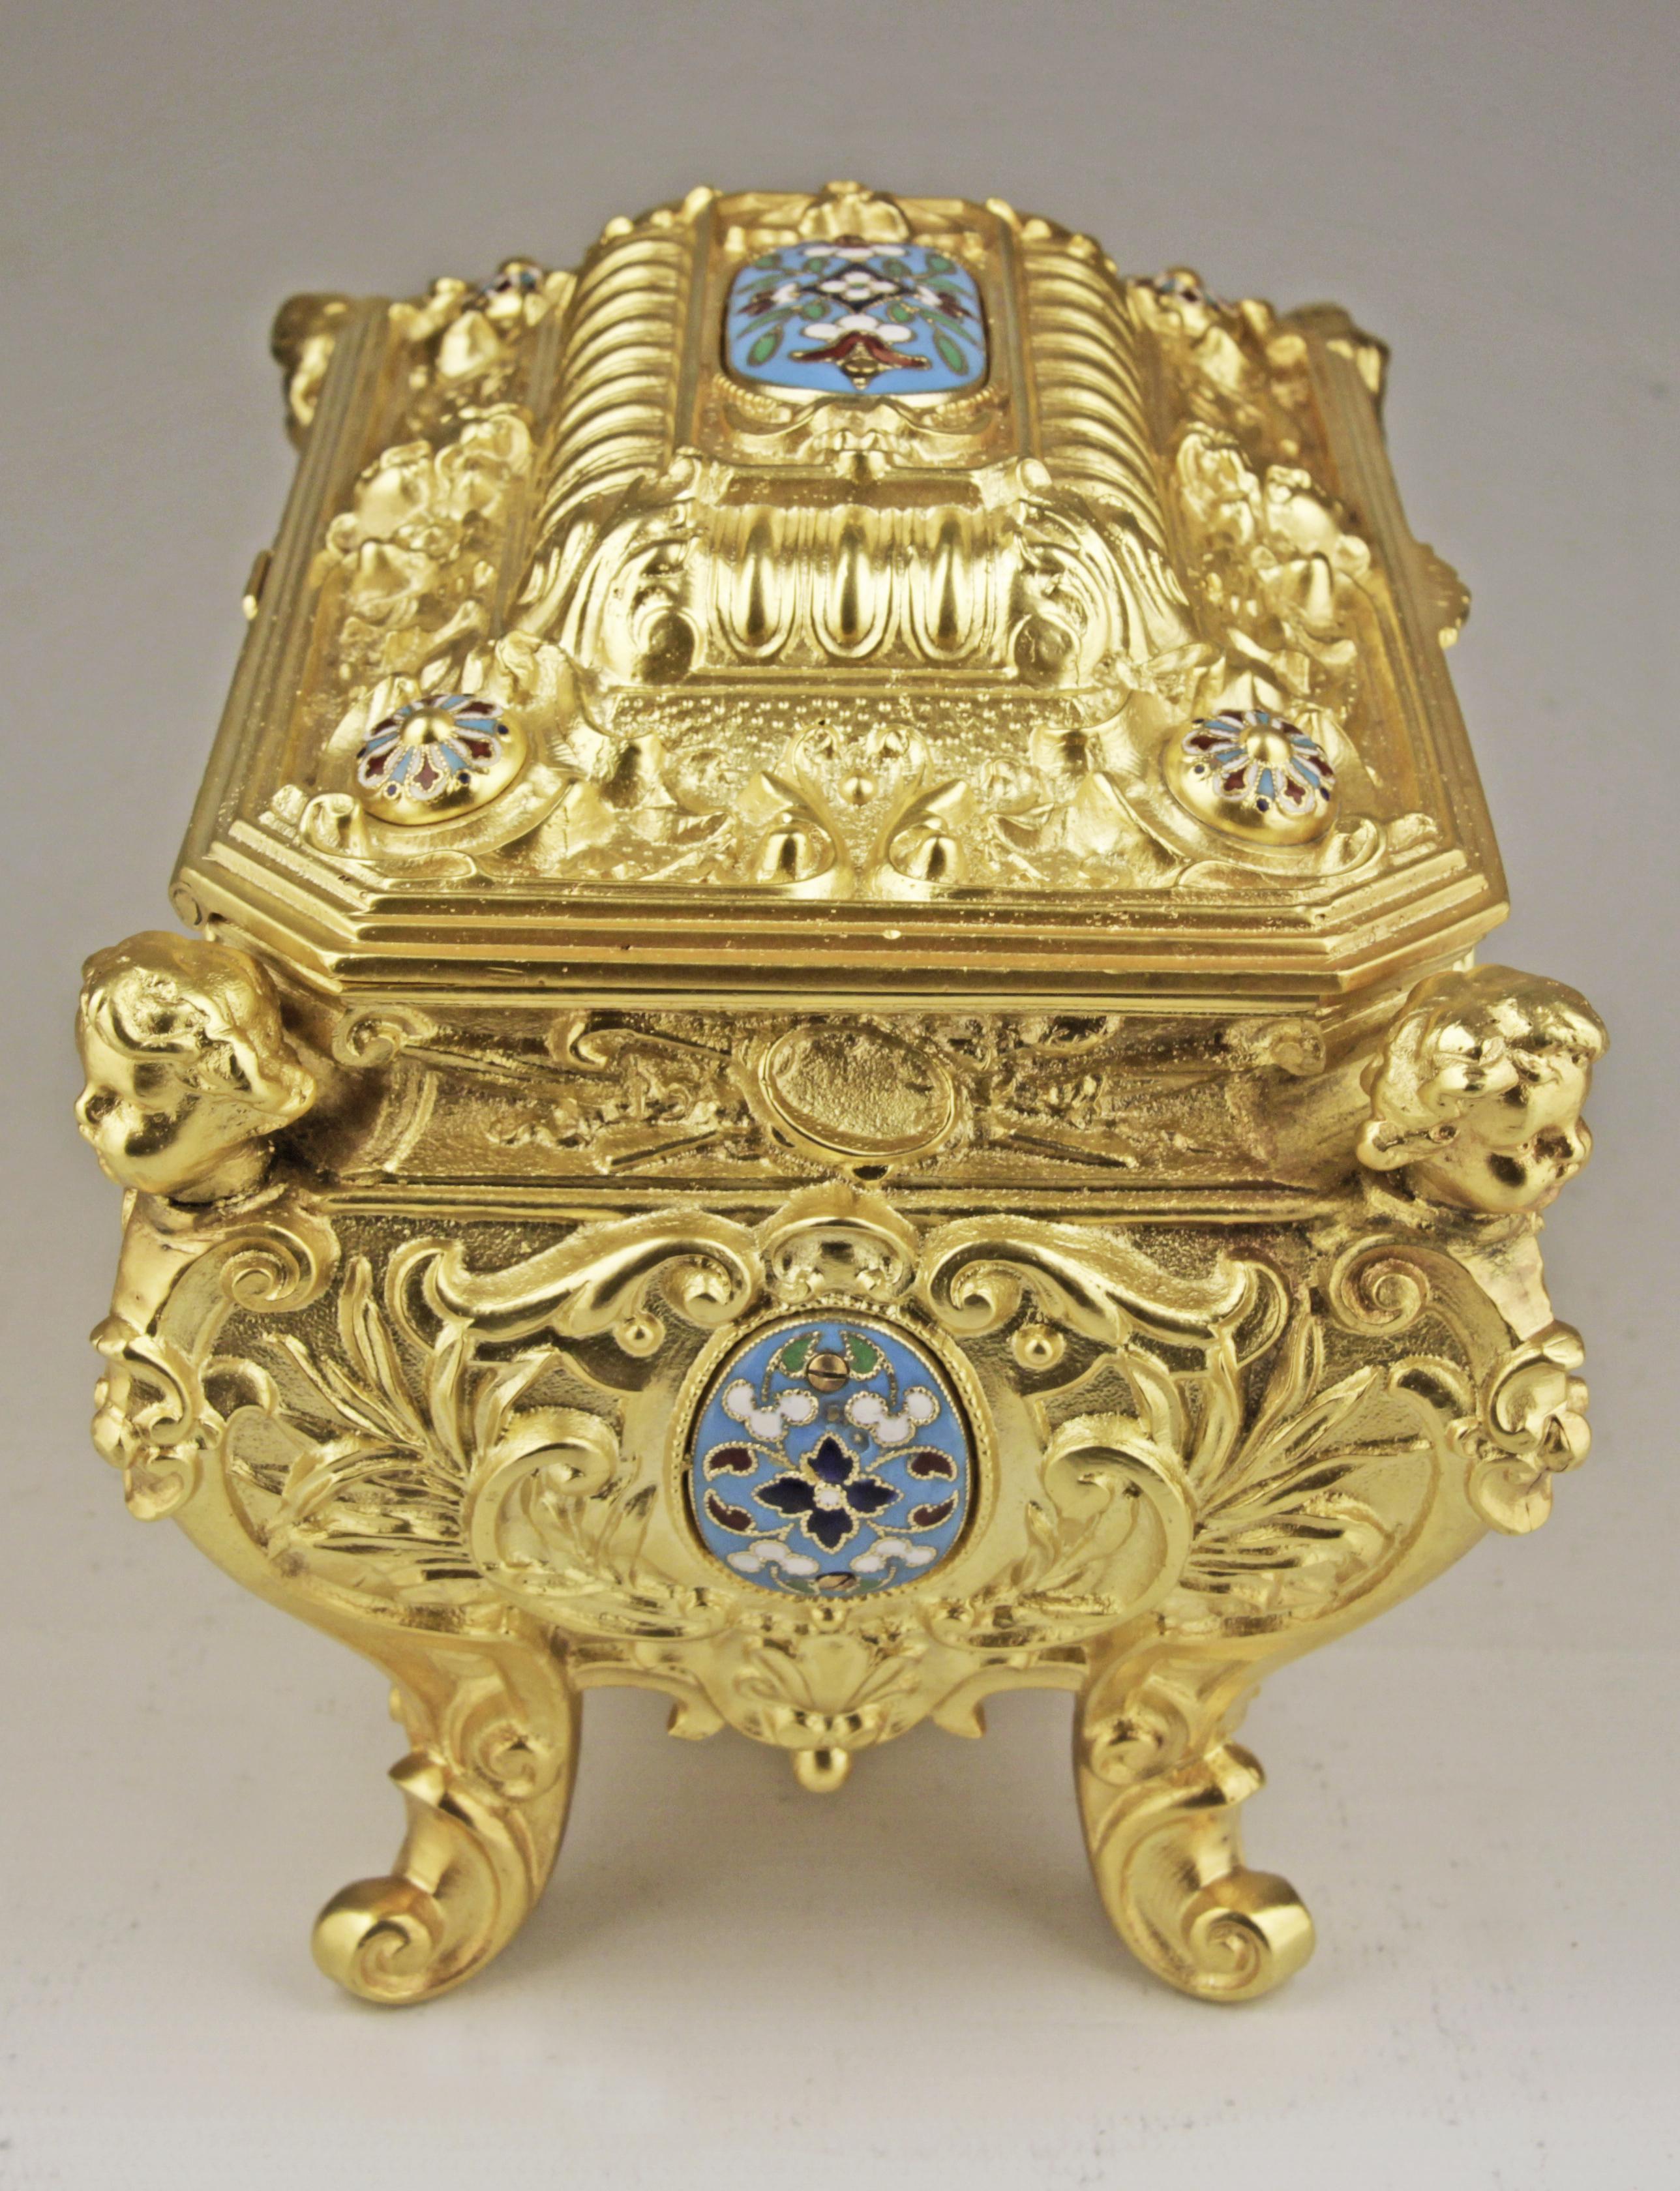 19th Century French Empire Cloisonné Bronze Jewelry Casket with Velvet Interior In Good Condition For Sale In North Miami, FL